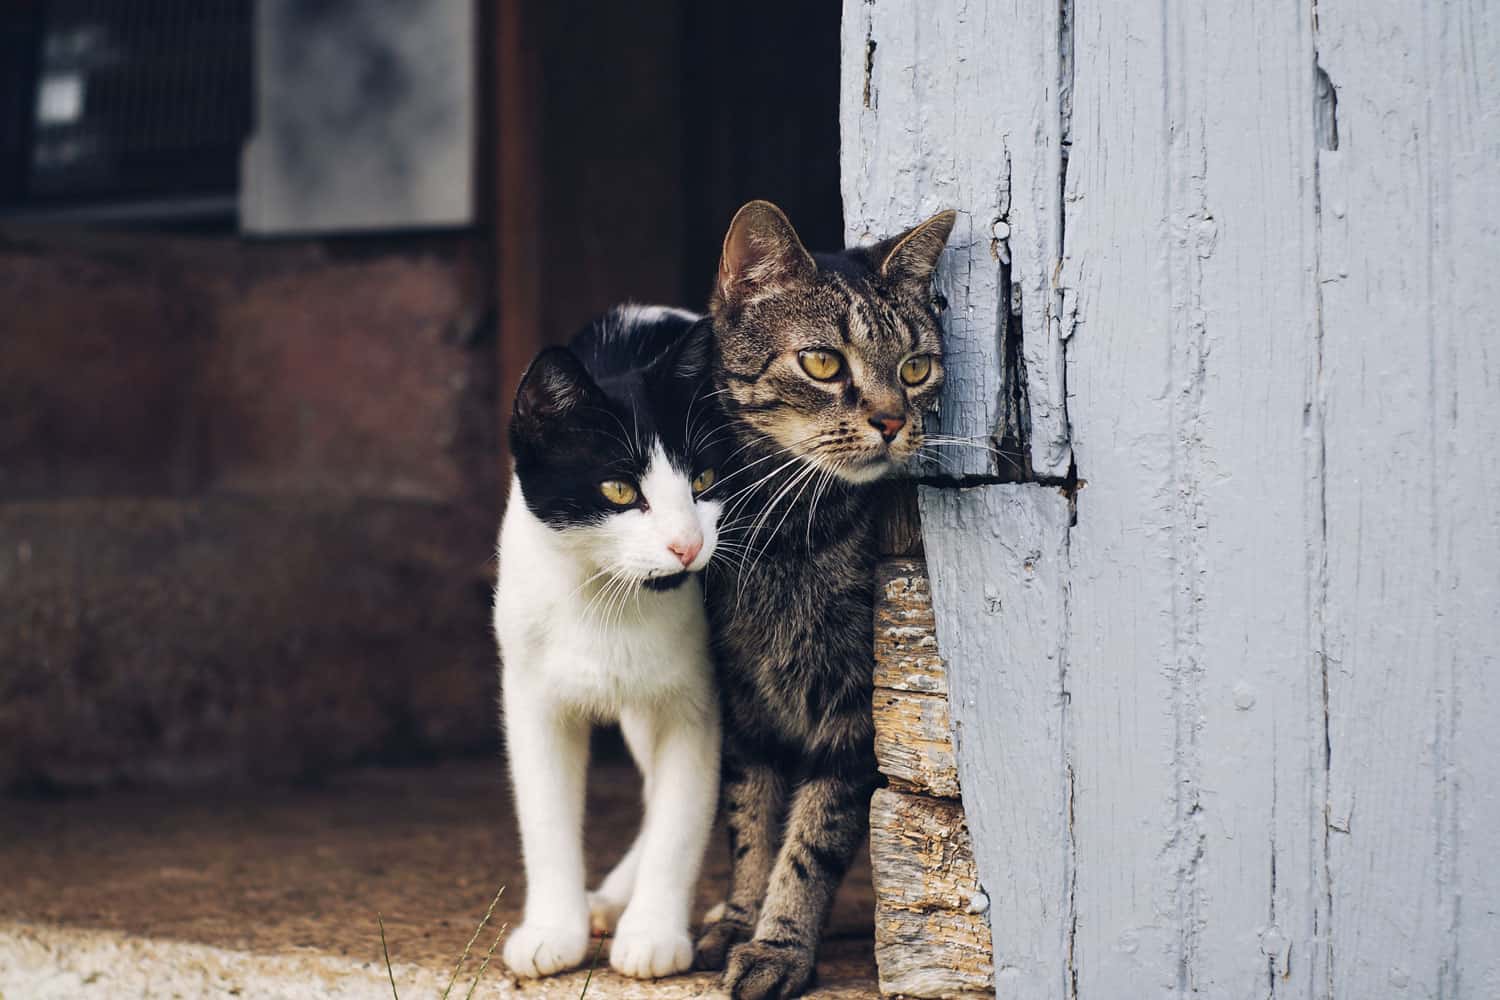 Two barn cats in the barn